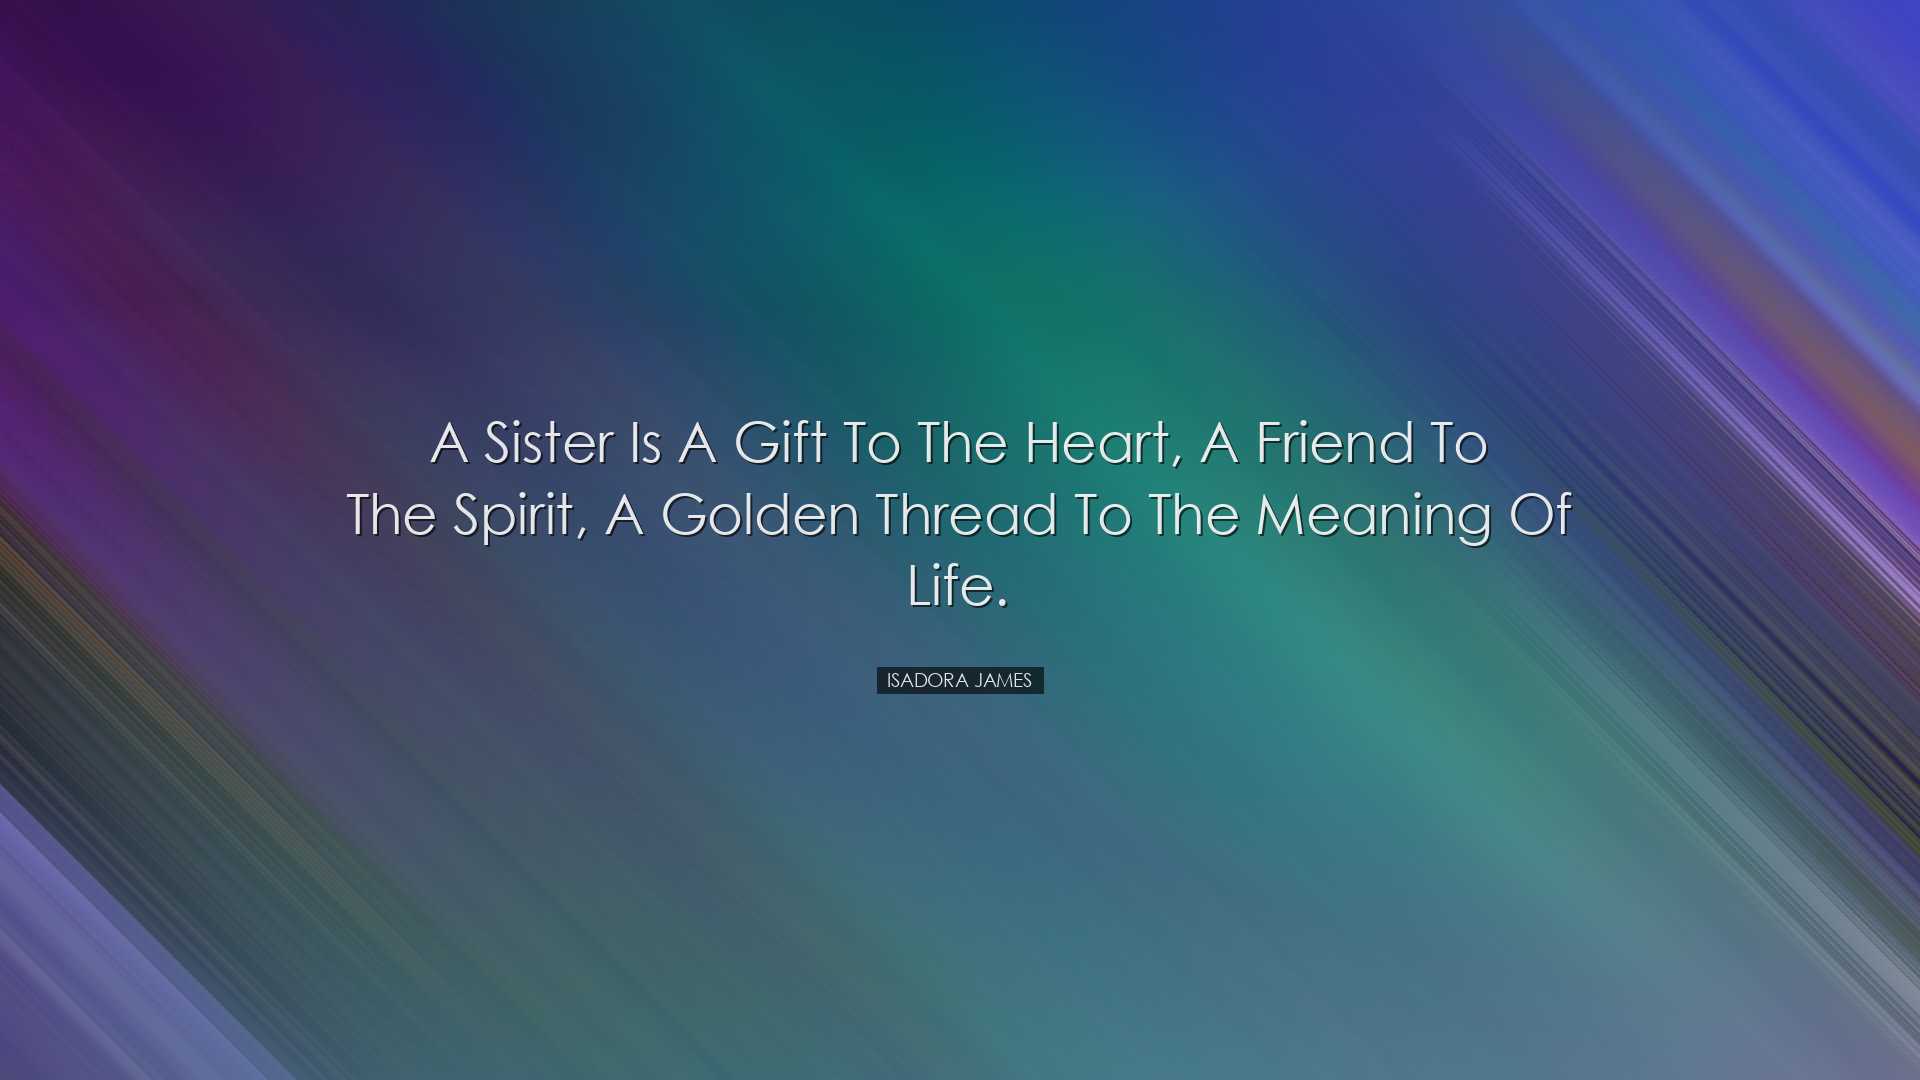 A sister is a gift to the heart, a friend to the spirit, a golden